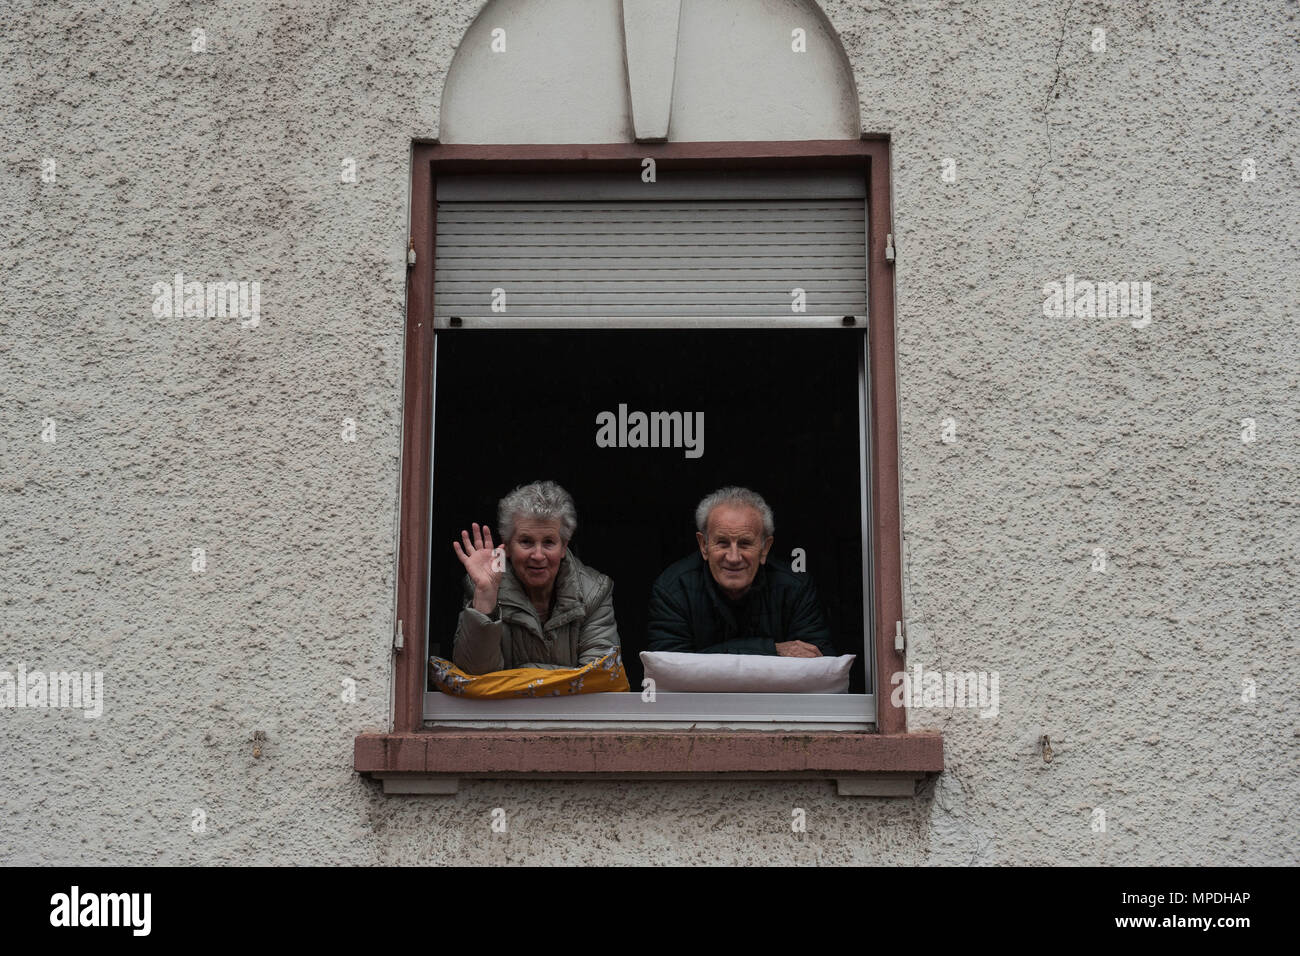 Two elderly people peer out their house window during fasching, a festival held across Europe, in the city of Ramstein, Germany, Feb. 28, 2017. The festival season is celebrated by people from Germany, Switzerland and Austria. (U.S. Air Force photo by Senior Airman Lane T. Plummer) Stock Photo